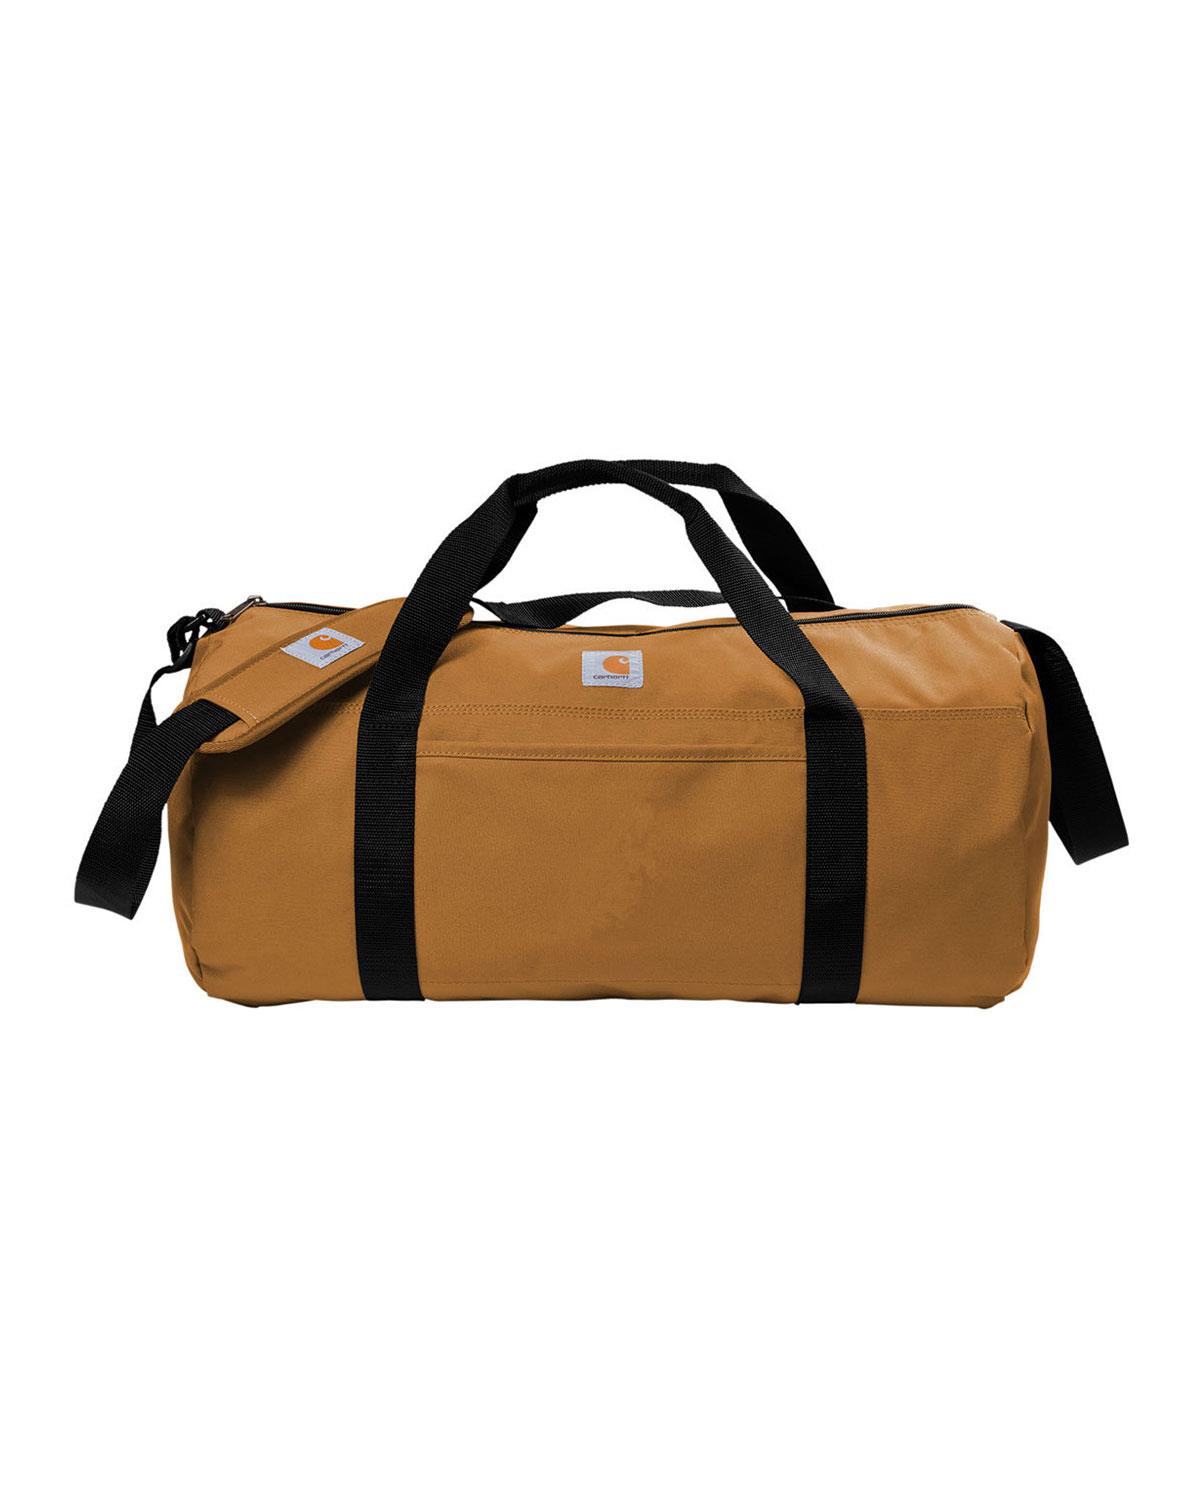 Carhartt CT89105112 Canvas Packable Duffel with Pouch